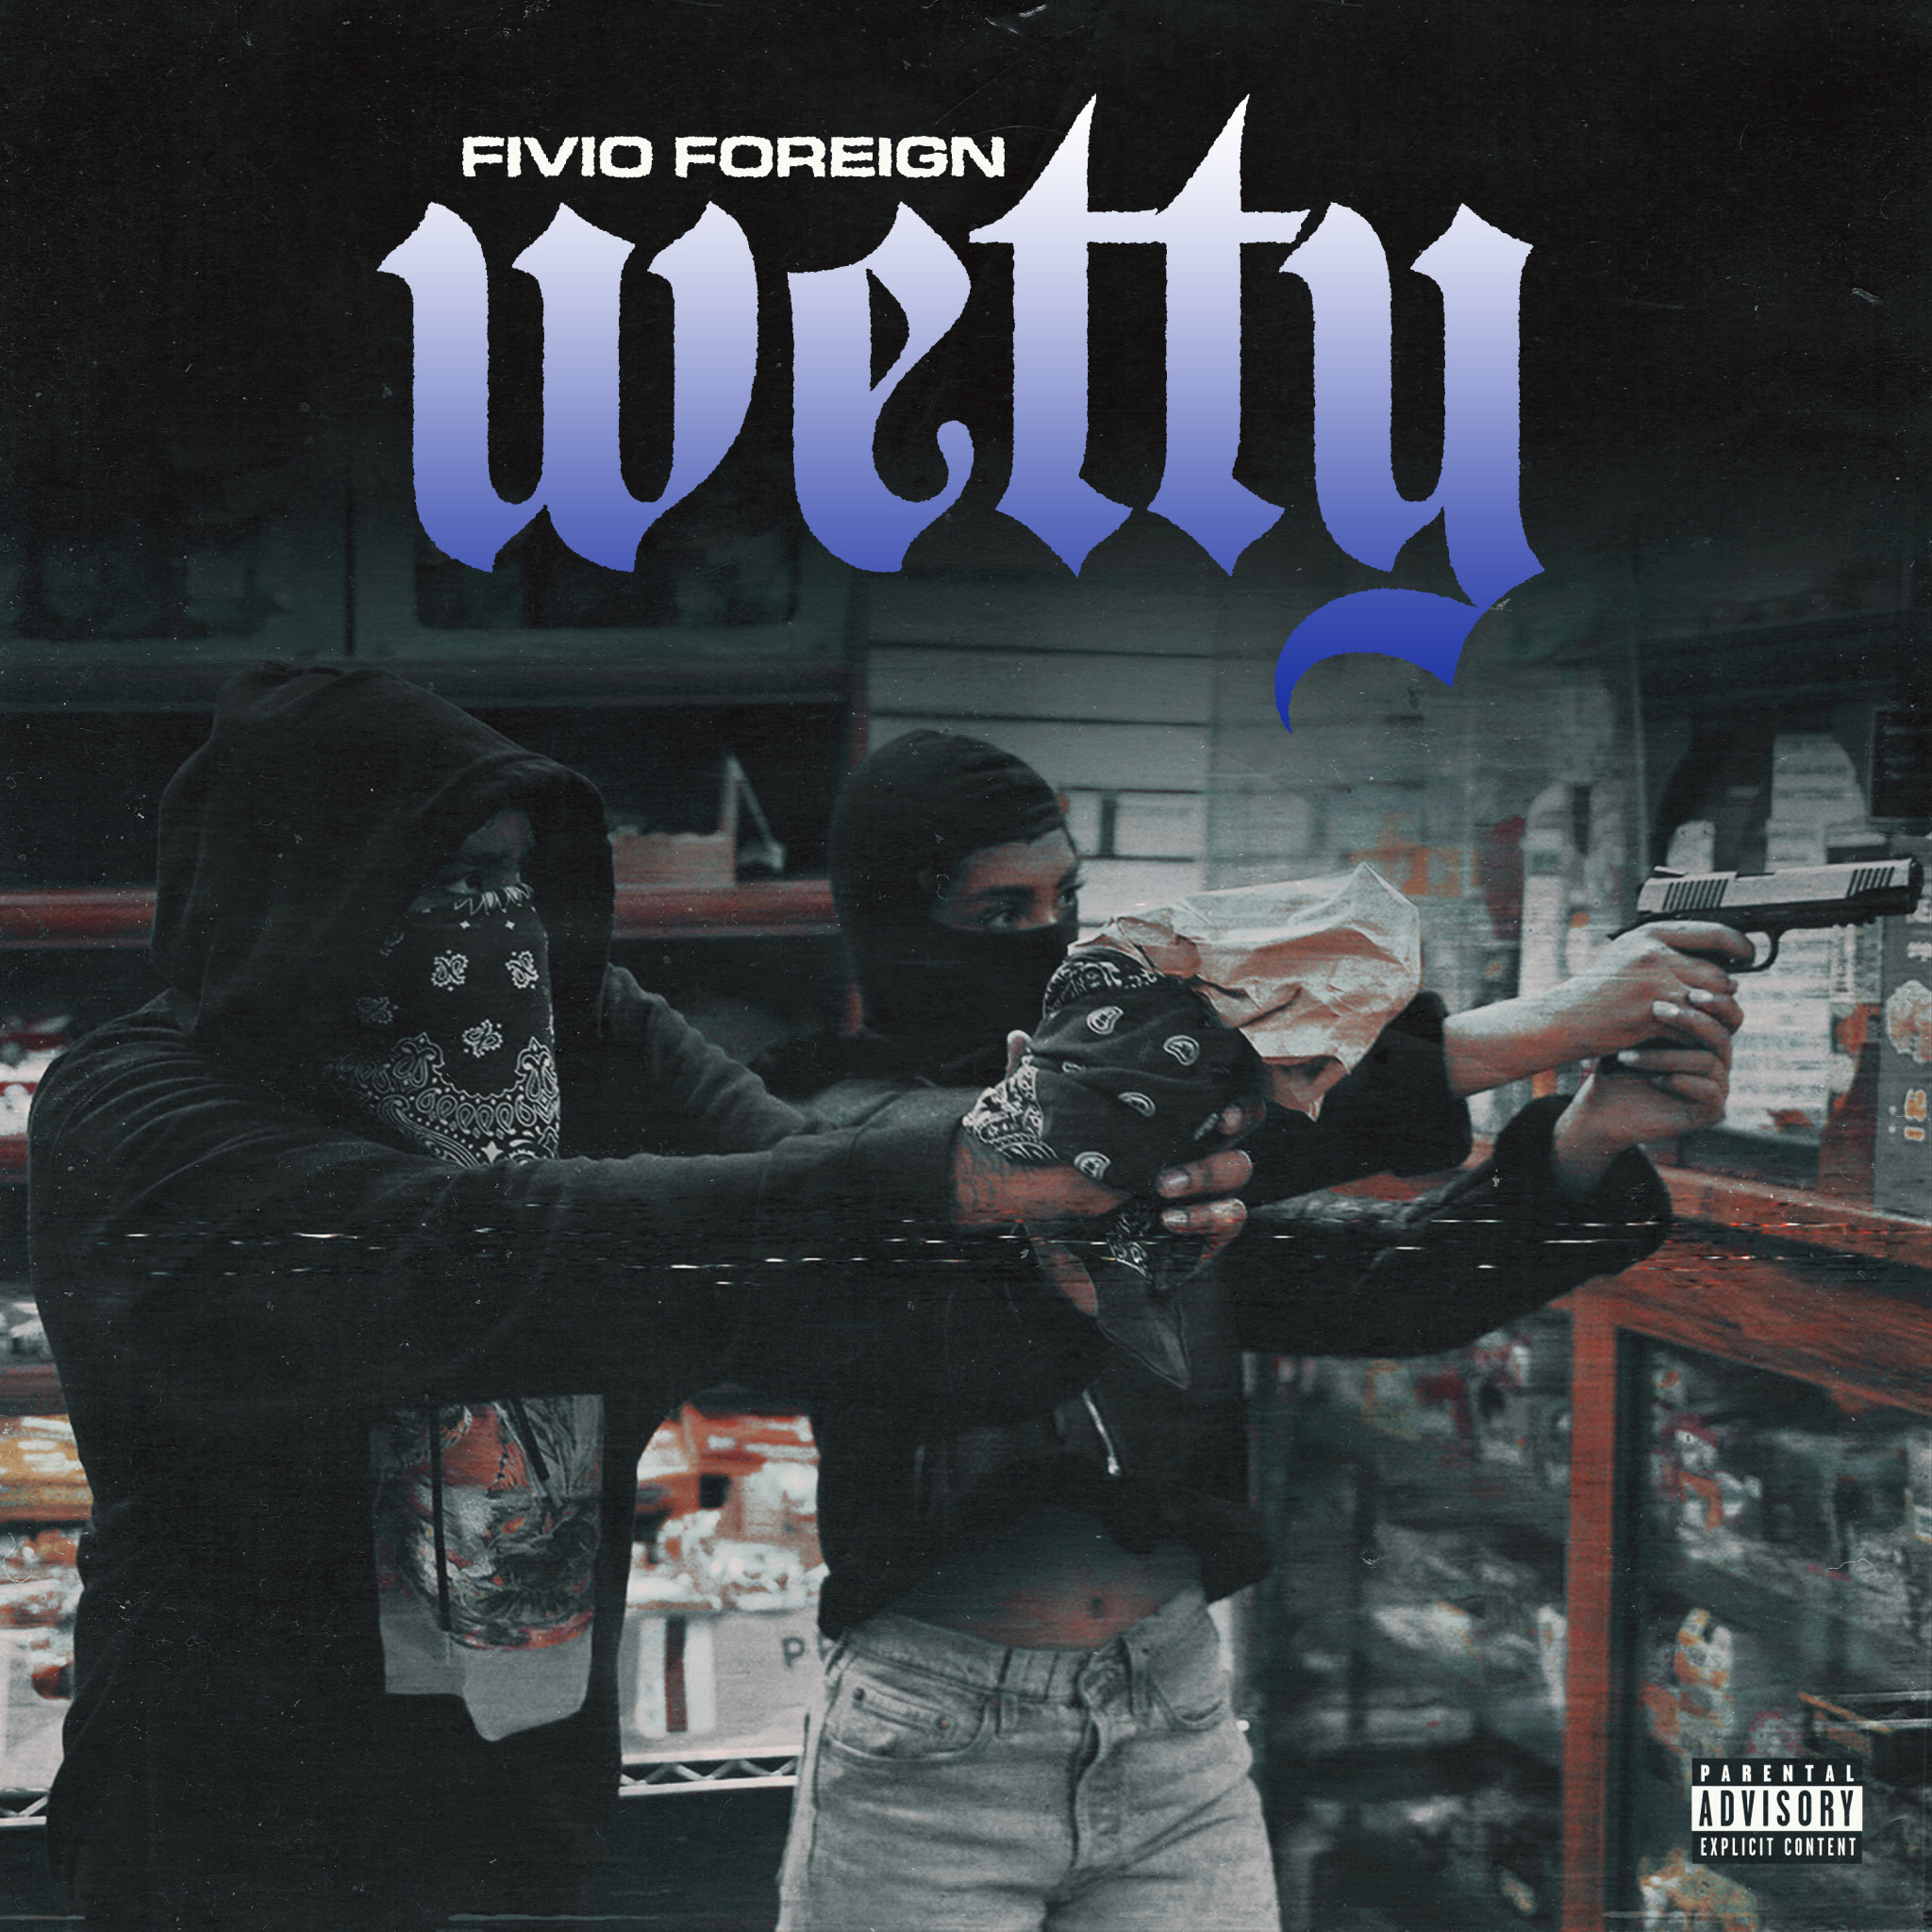 Fivio Foreign's 'Wetty' Visuals Are Finally Here